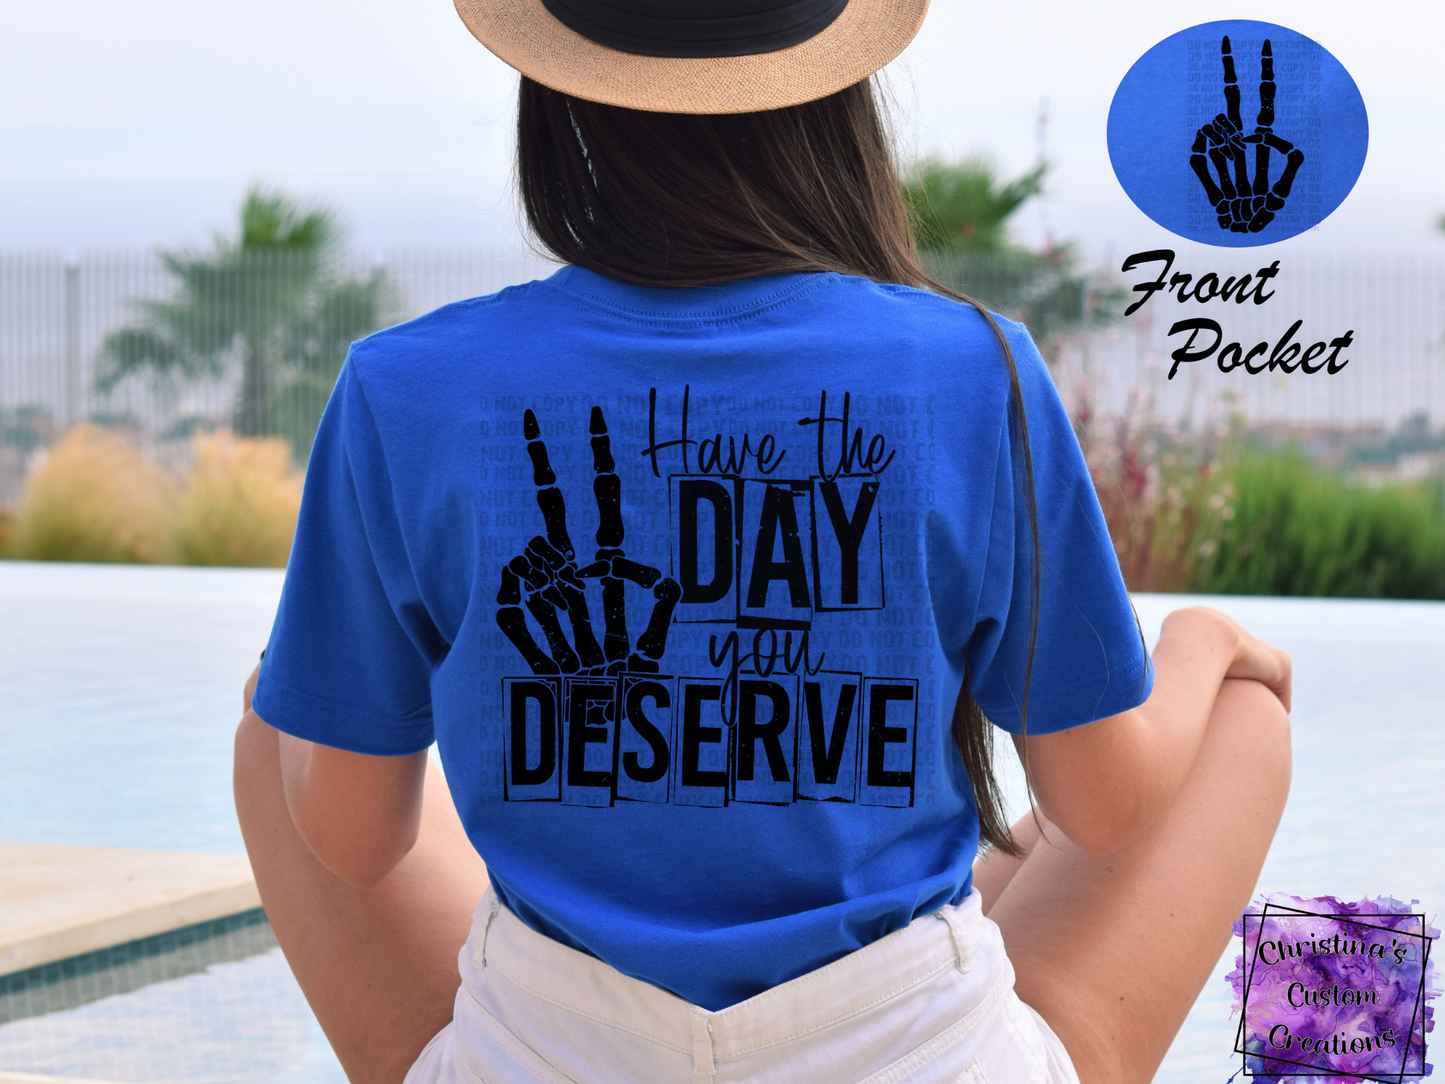 Have The Day You Deserve T-Shirt | Uplifting/Mental Health Shirt | Fast Shipping | Super Soft Shirts for Men/Women